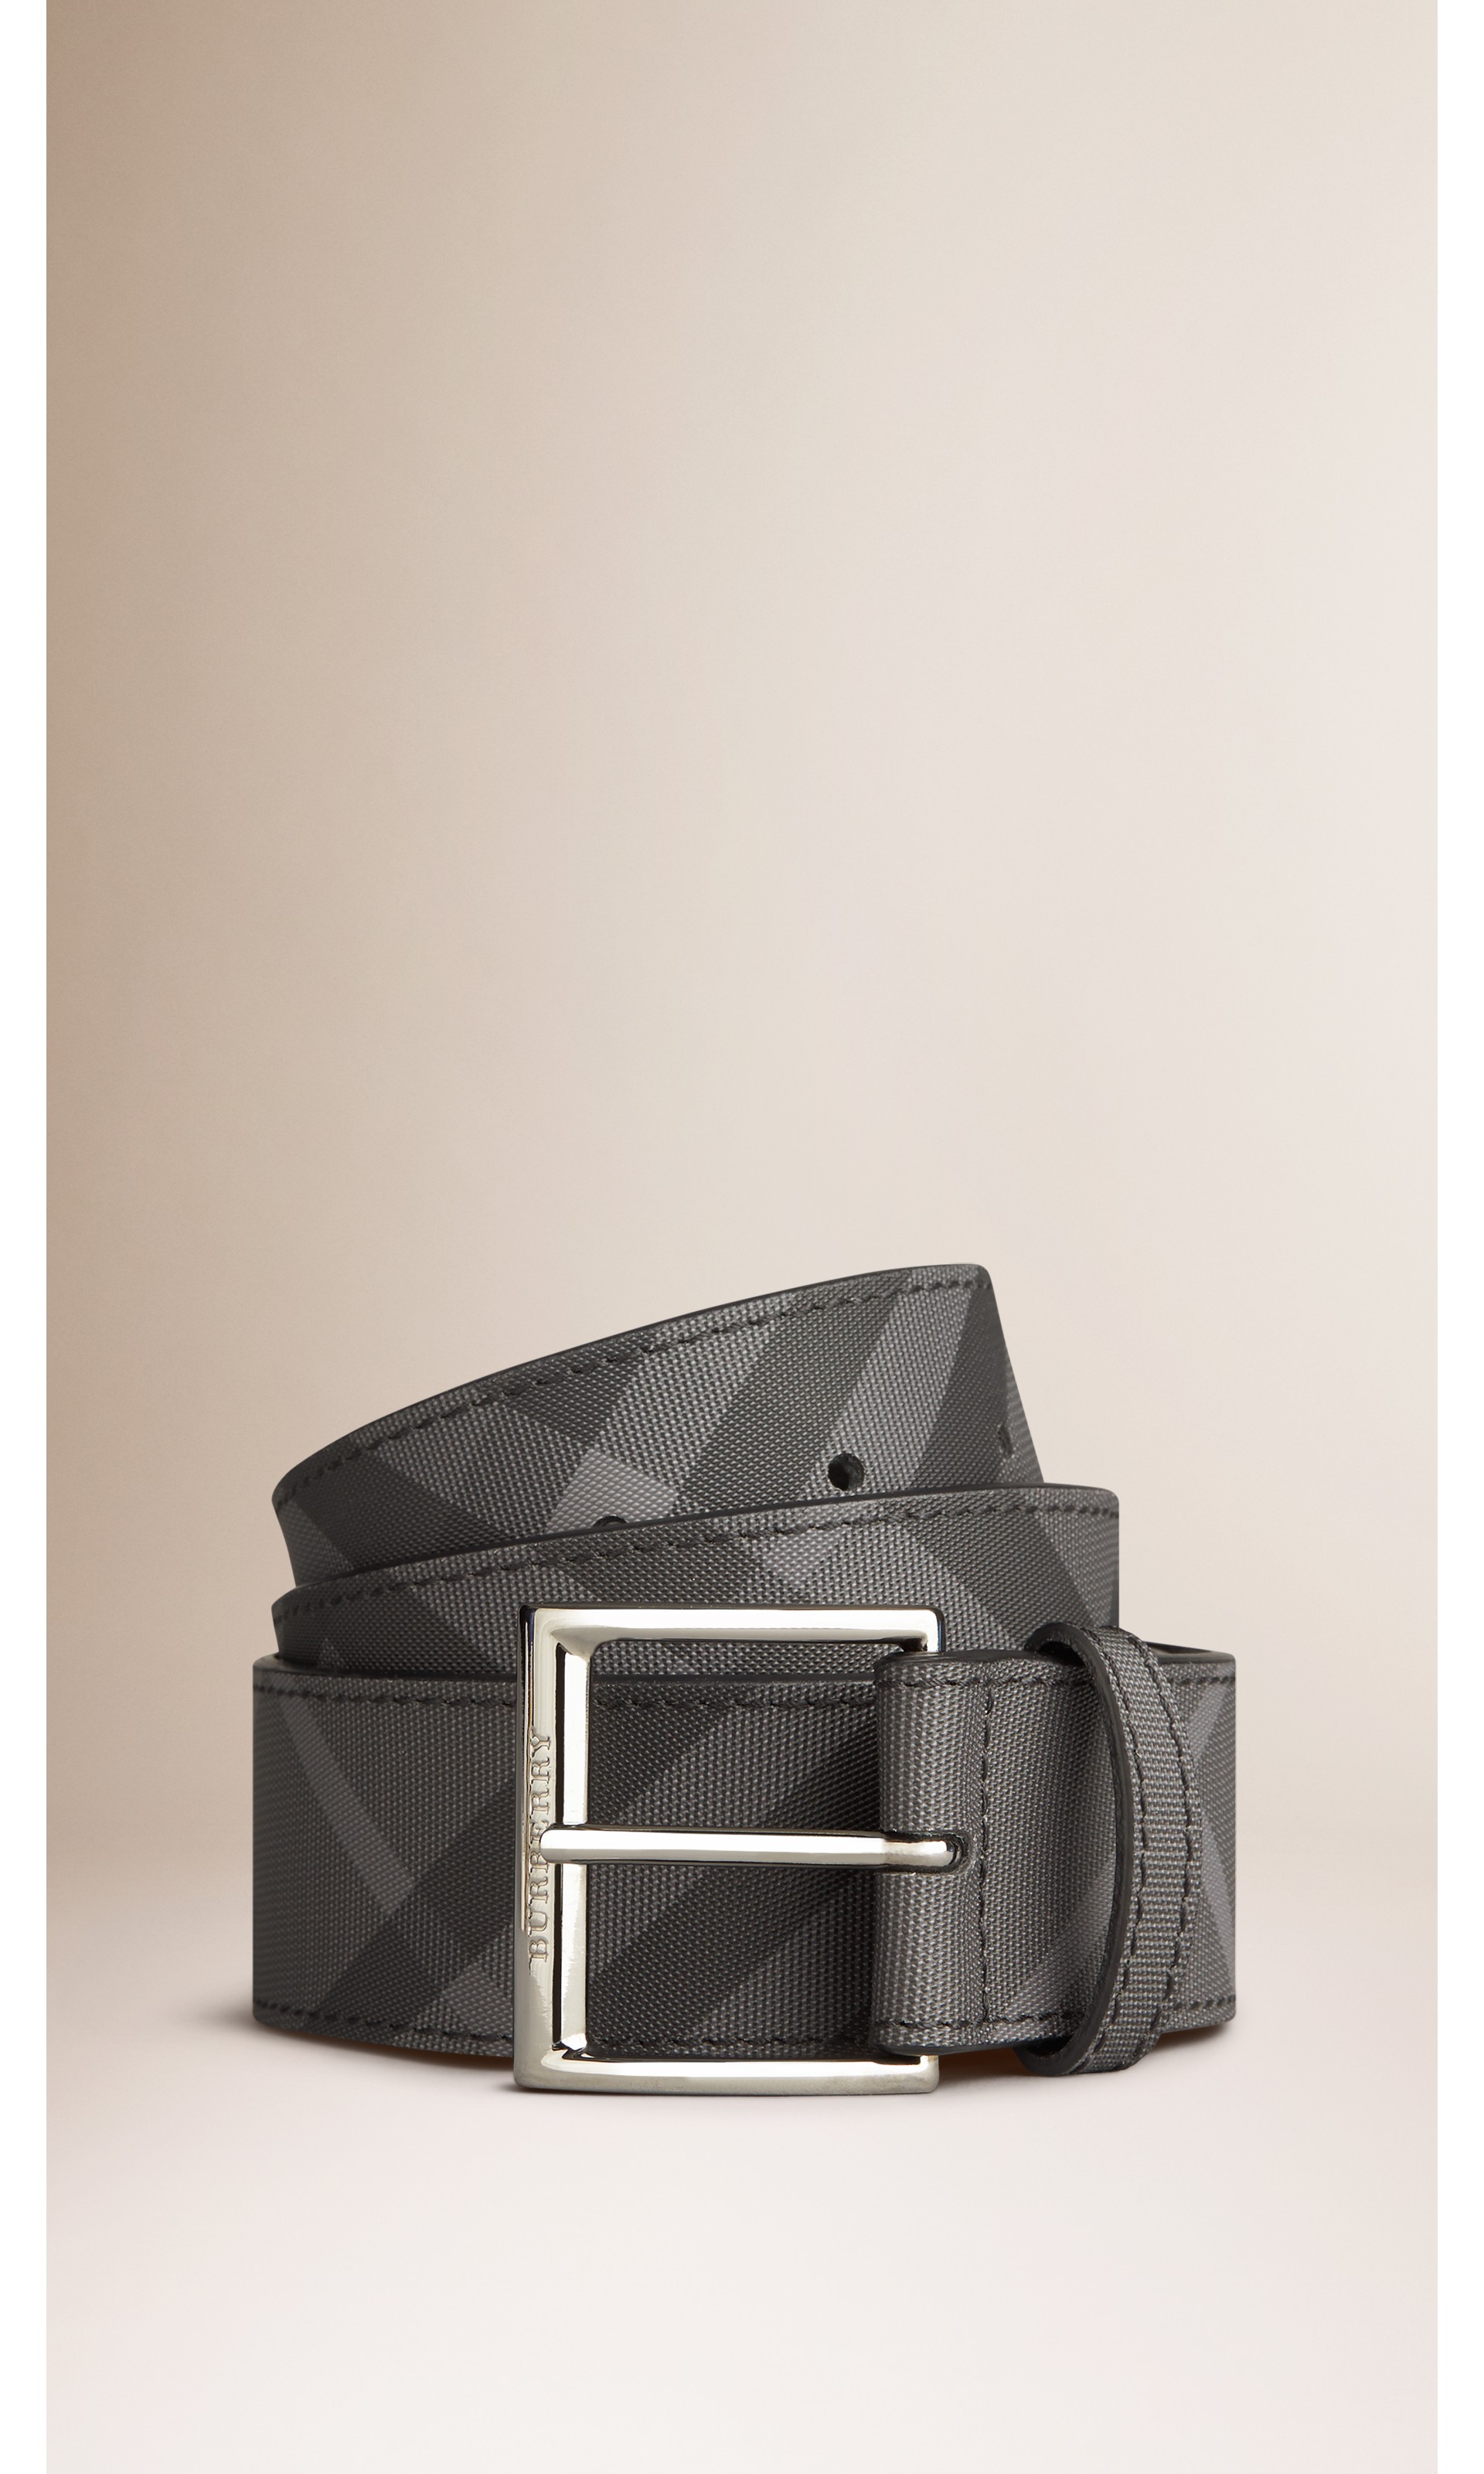 Charcoal Check Belt in Black - Men | Burberry United States